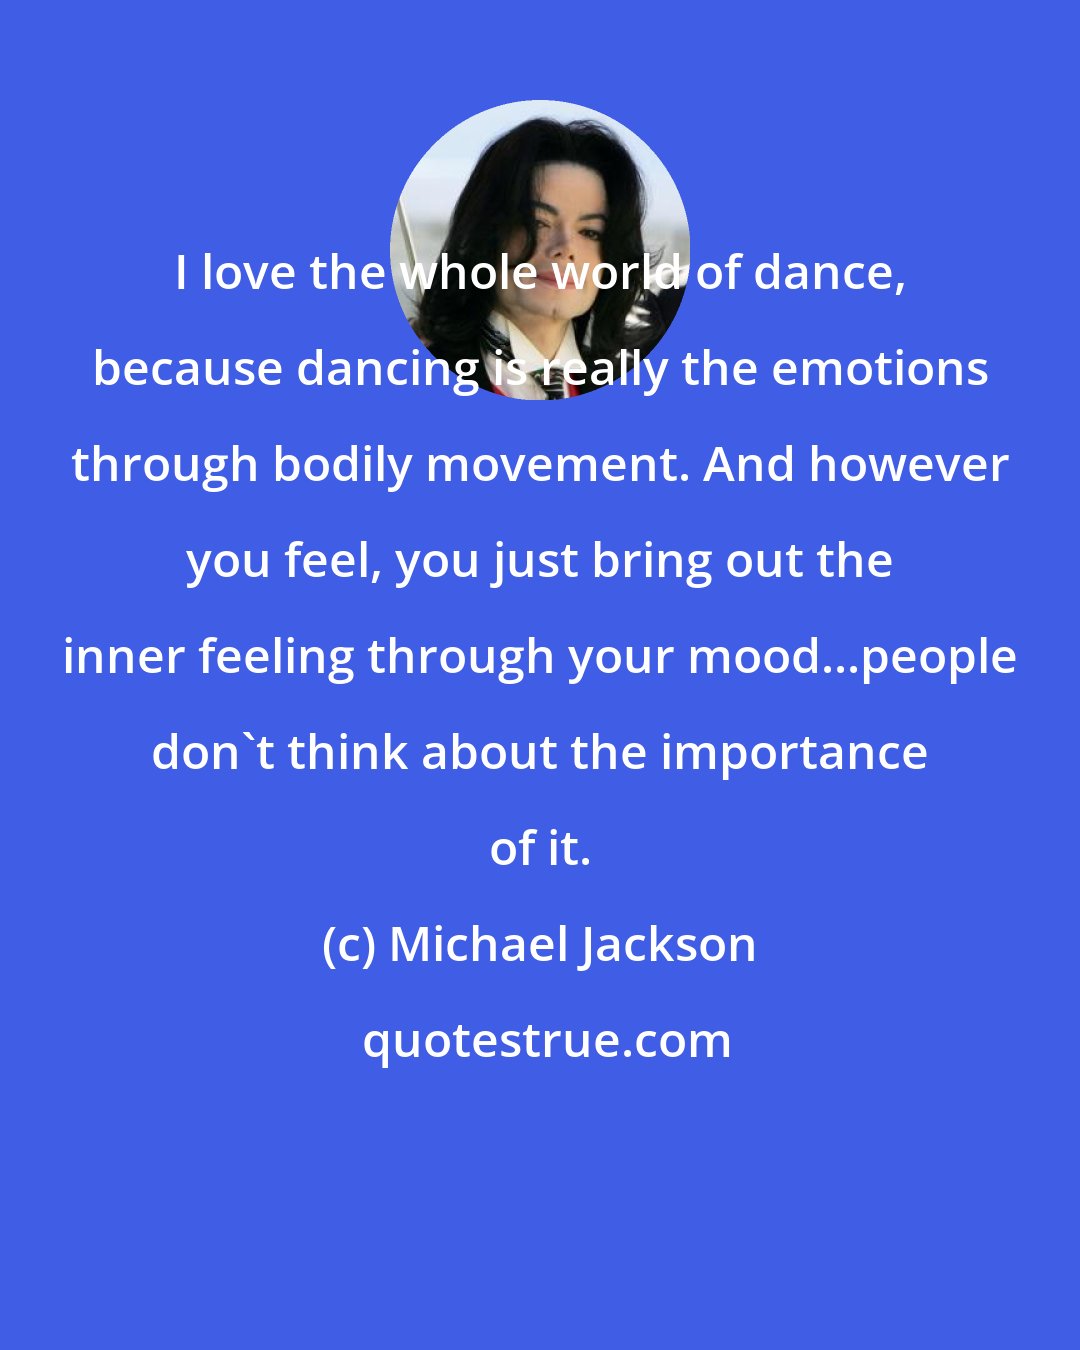 Michael Jackson: I love the whole world of dance, because dancing is really the emotions through bodily movement. And however you feel, you just bring out the inner feeling through your mood...people don't think about the importance of it.